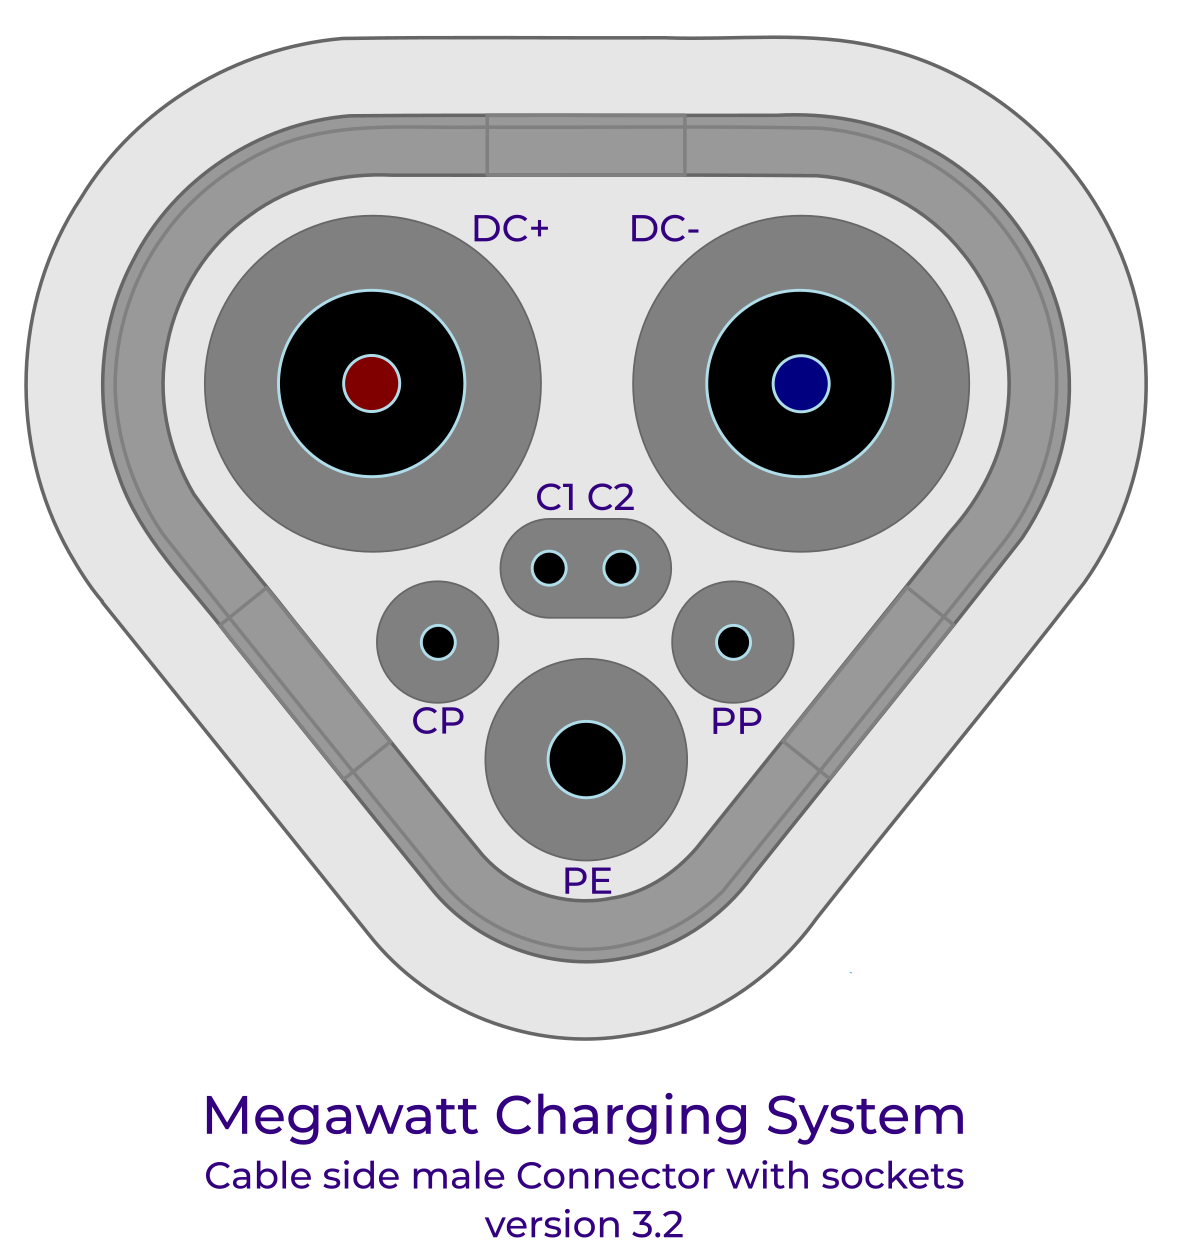 Megawatt Charging System (MCS) - connector with pinout